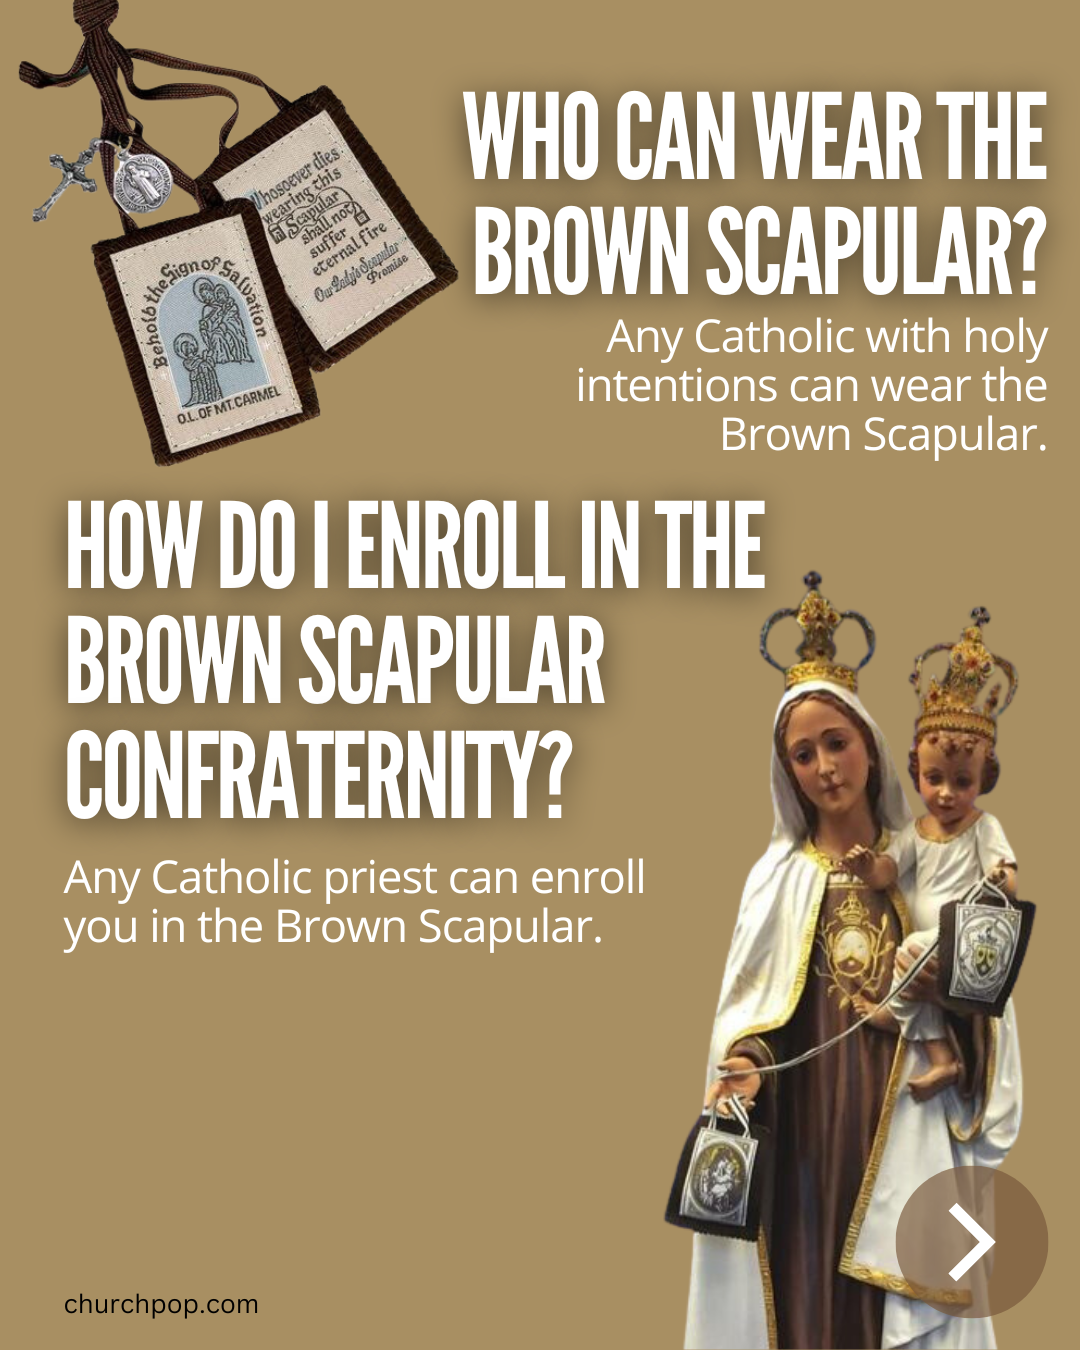 How do I enroll in the brown scapular? Who can wear the brown scapular?